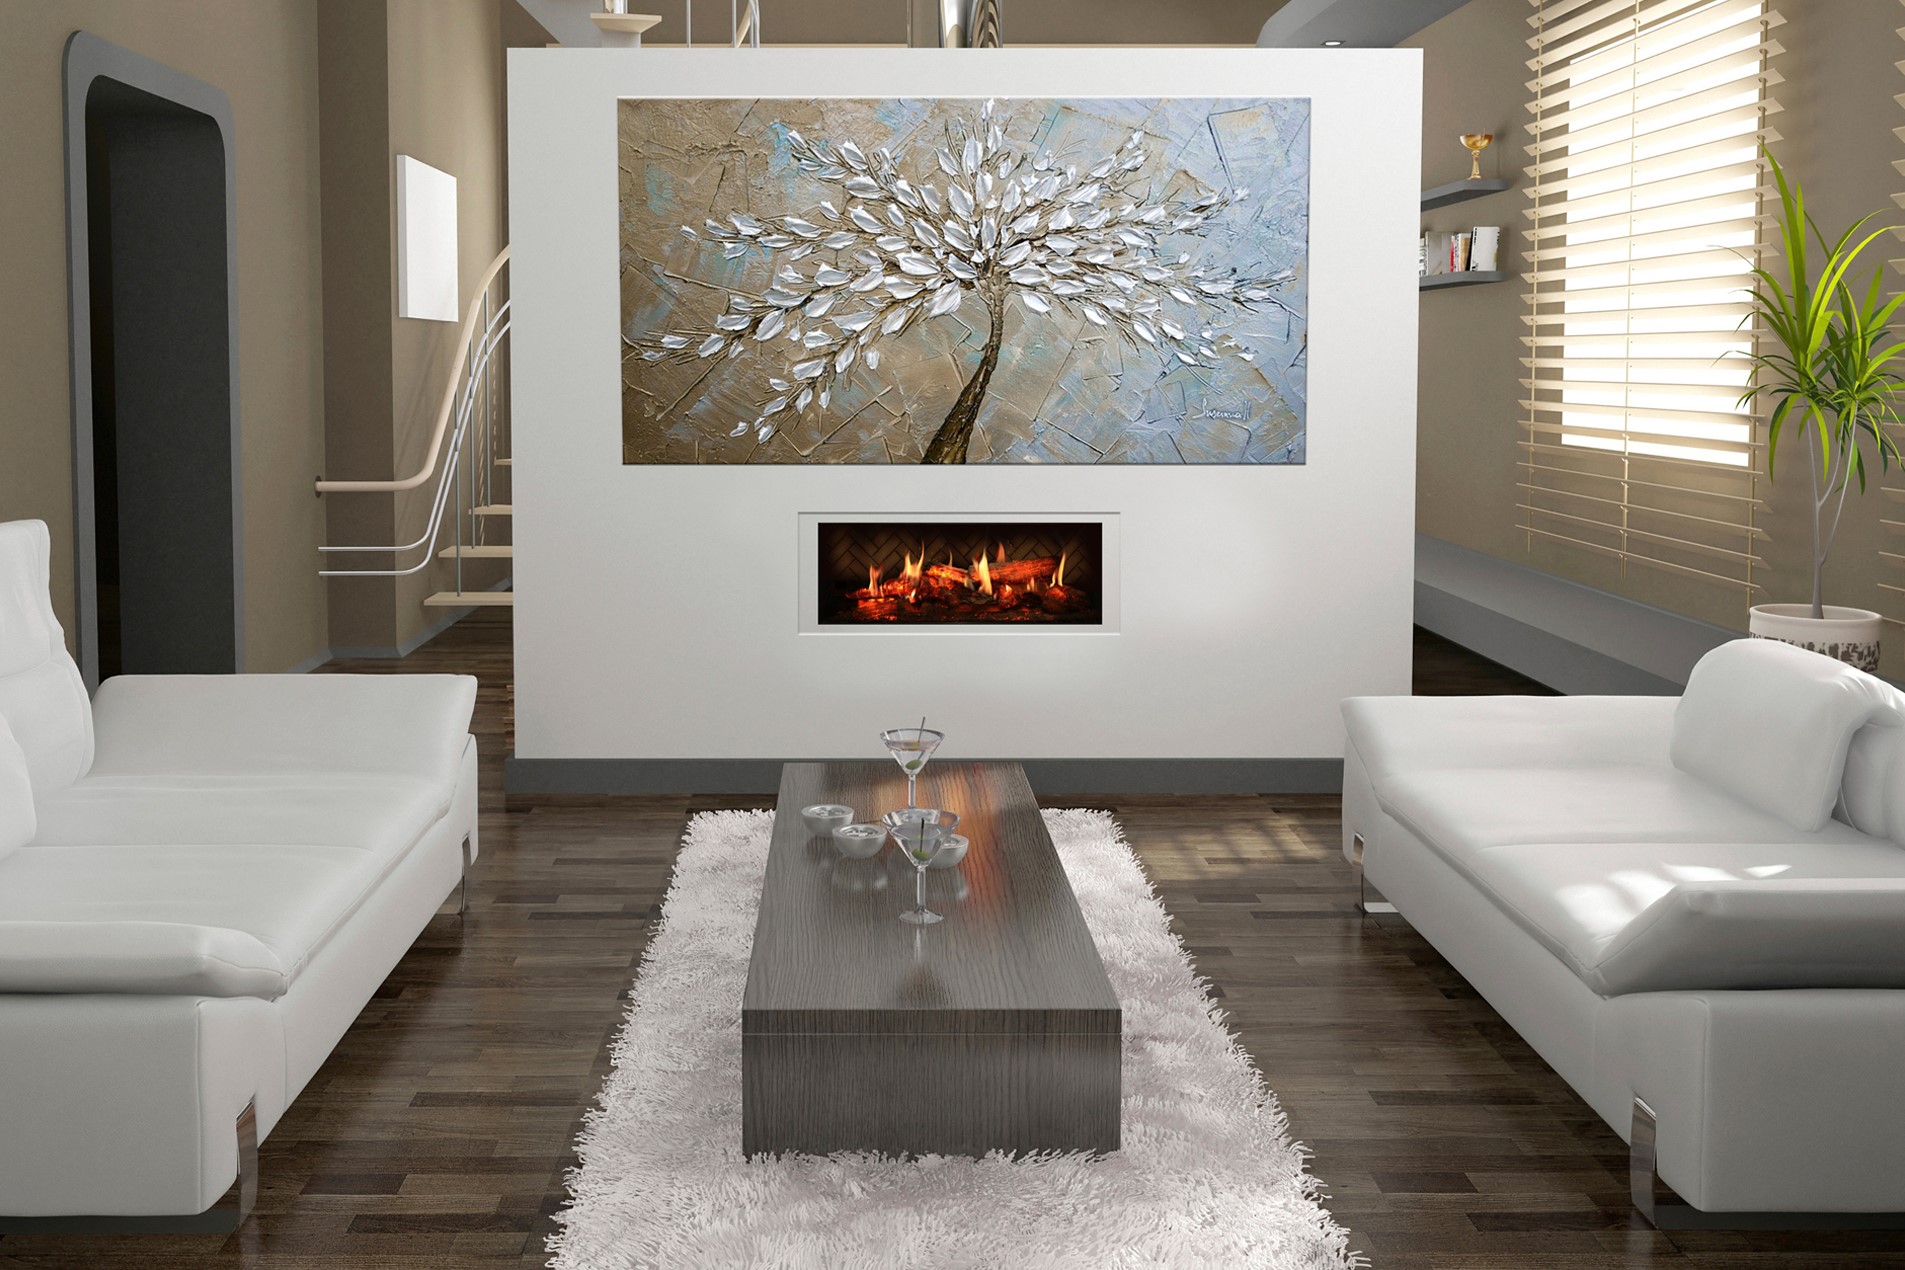 Is the Electric Fireplace Powerful? Does It Consume A Lot Of Electricity?